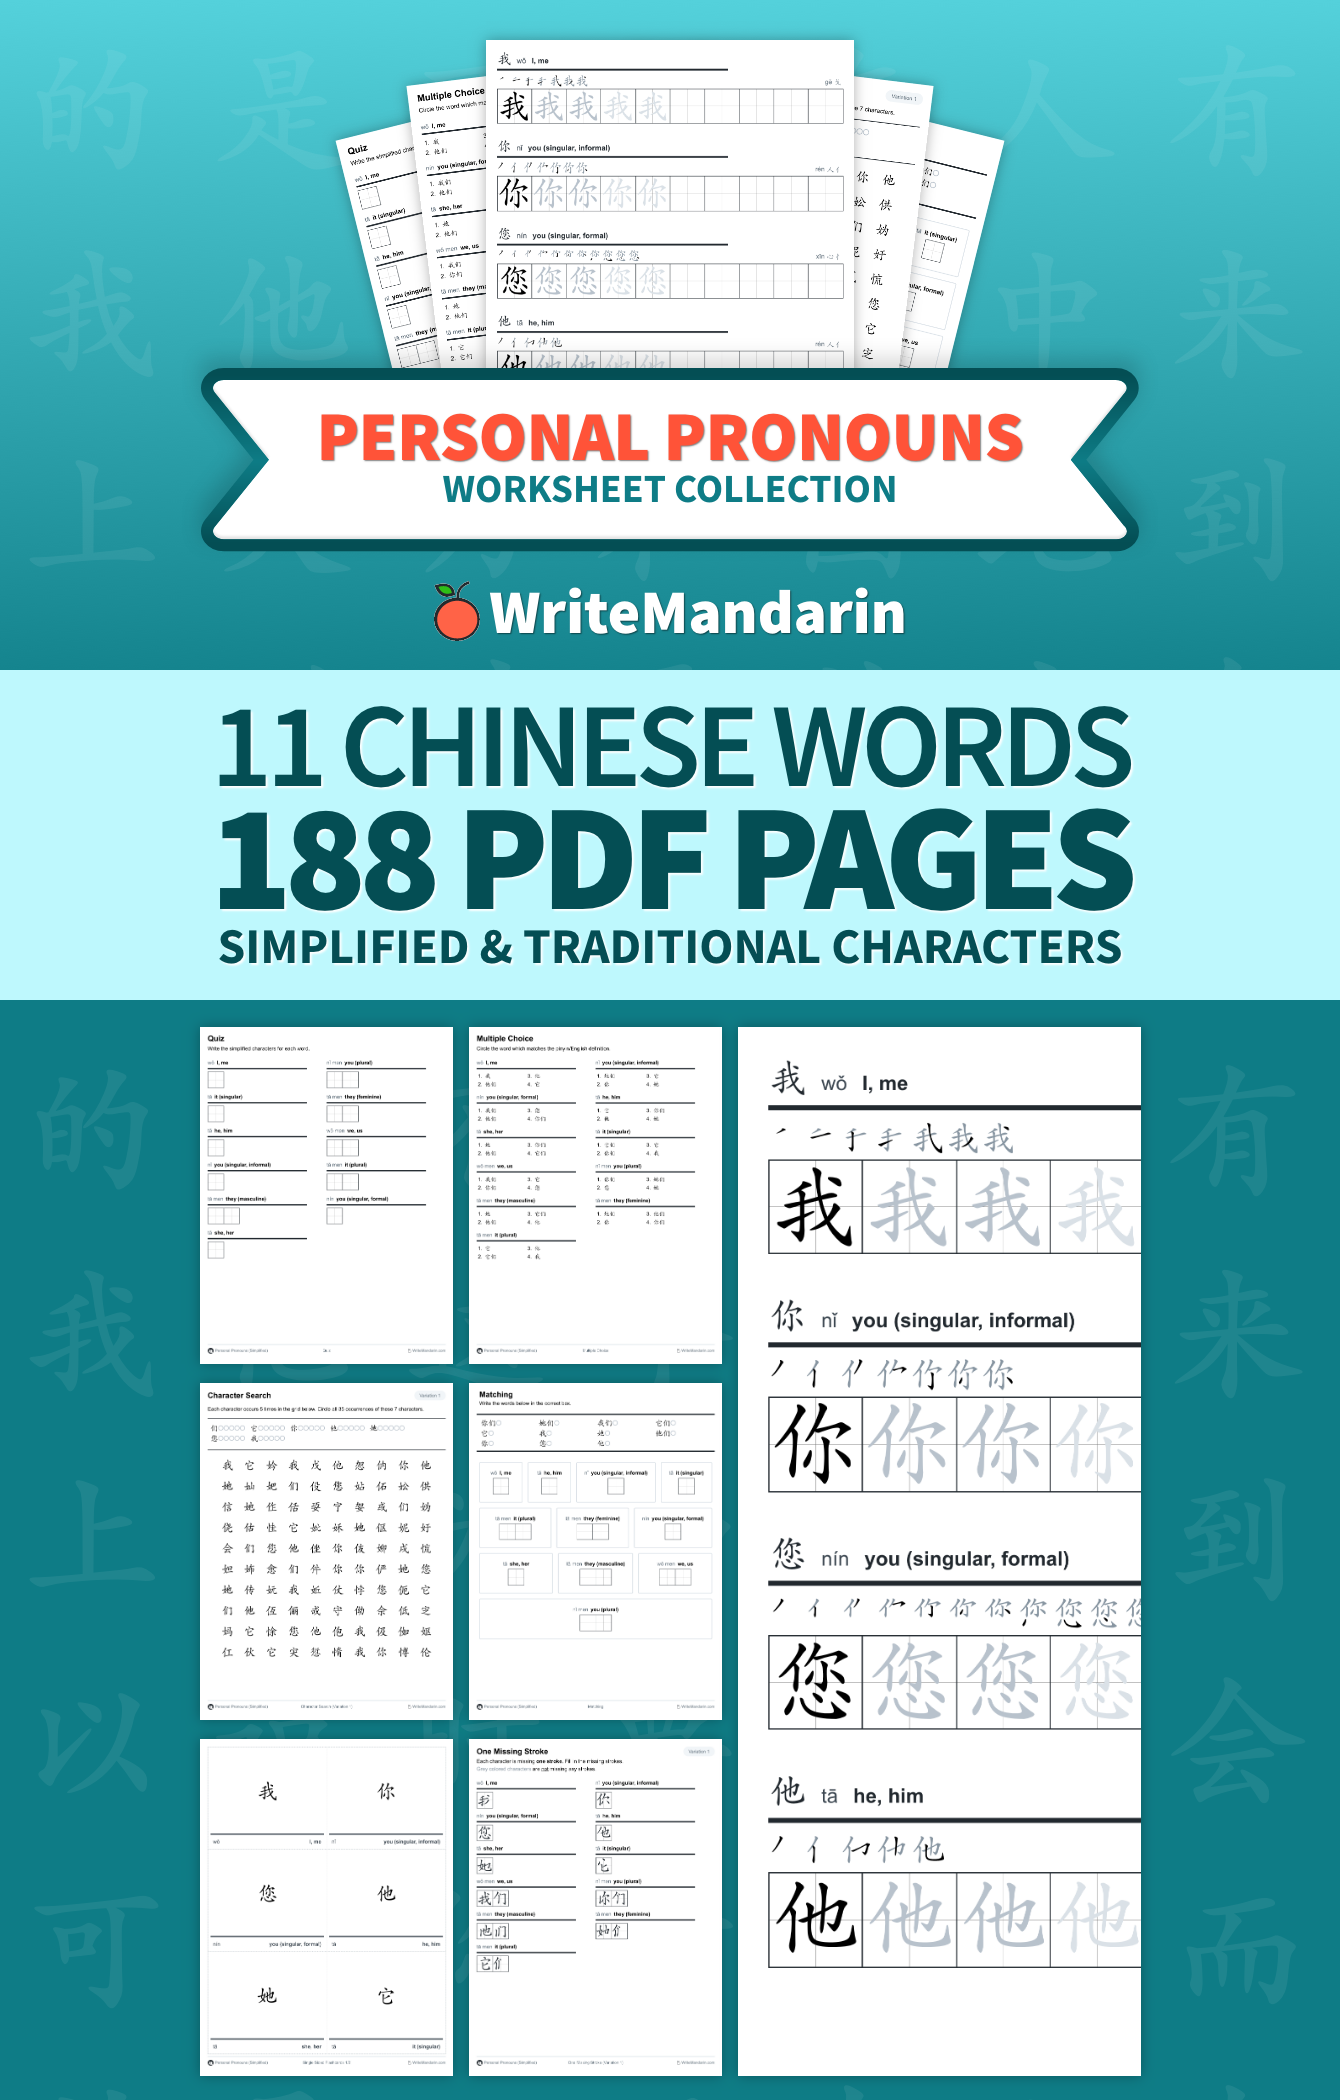 Preview image of Personal Pronouns worksheet collection